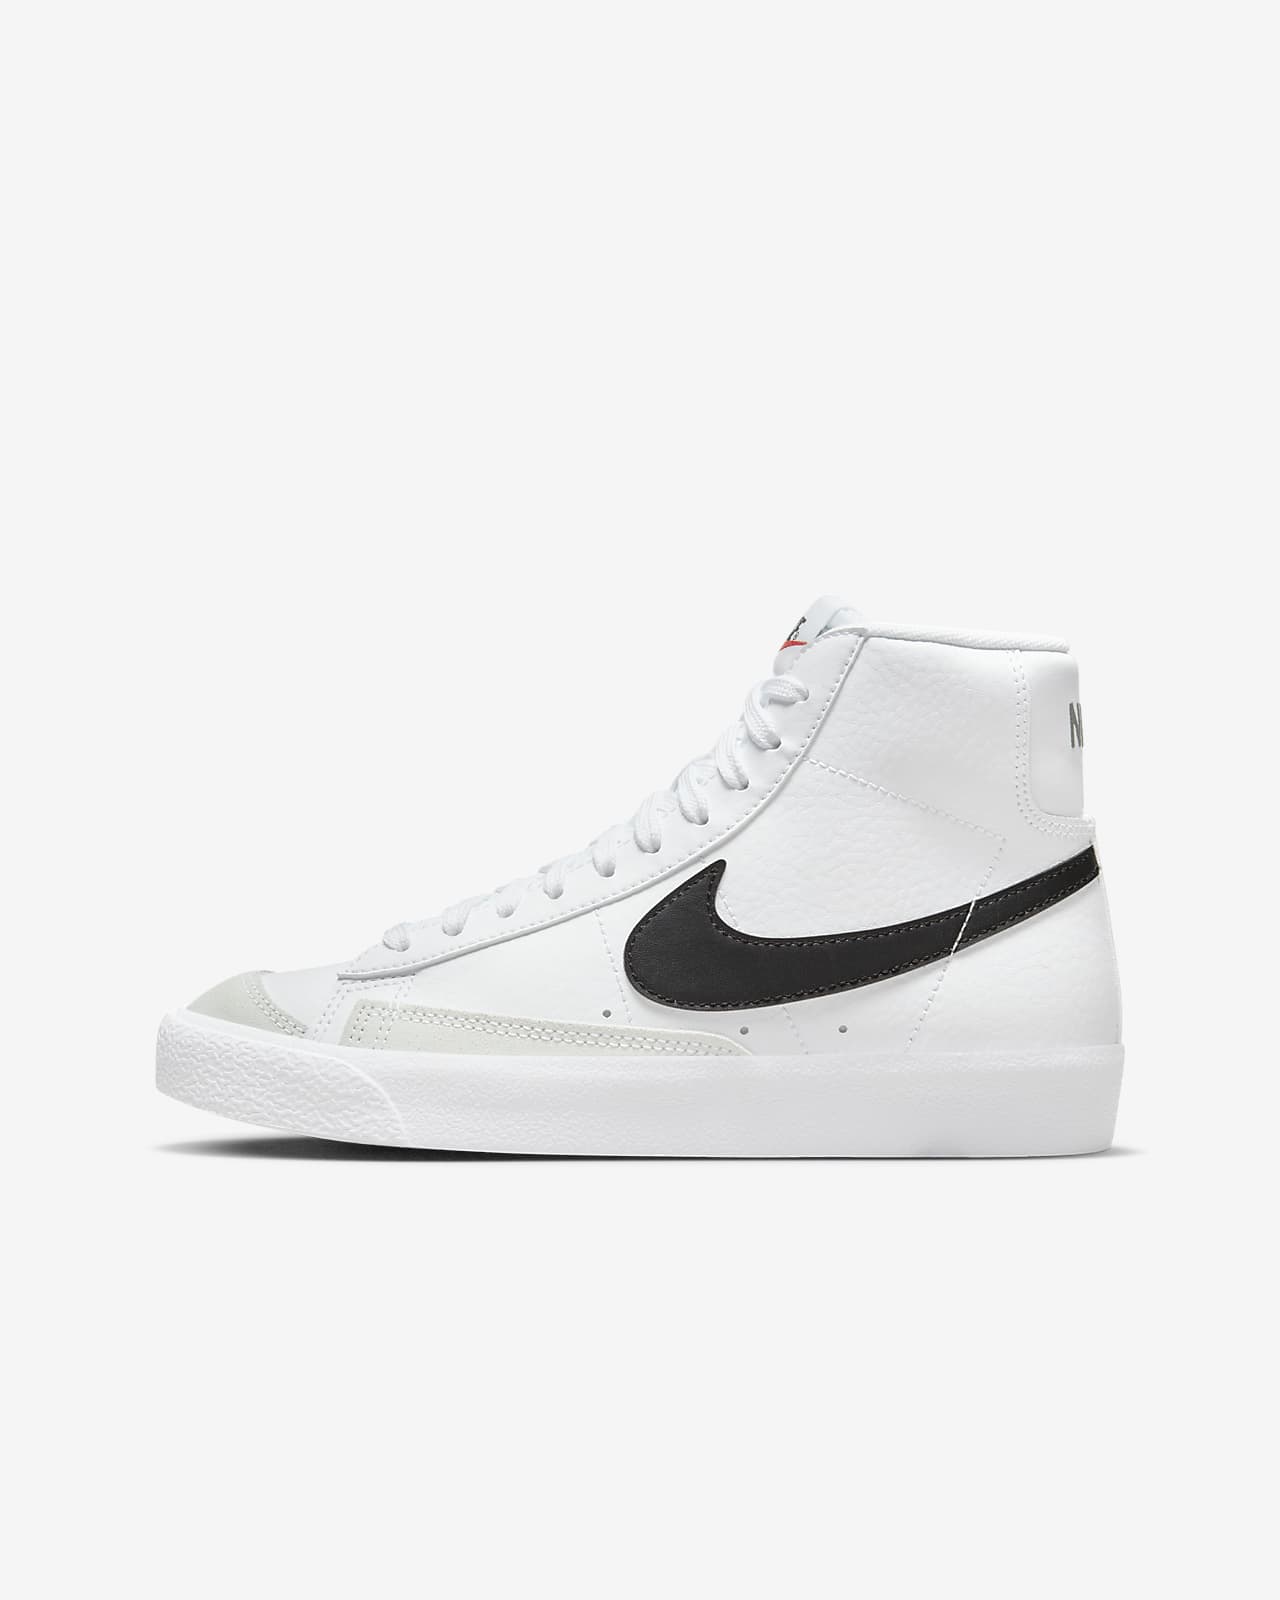 Nike Wmns Blazer Mid 77 Have A Good Game White Women Casual Shoes  DO2331-101 | eBay